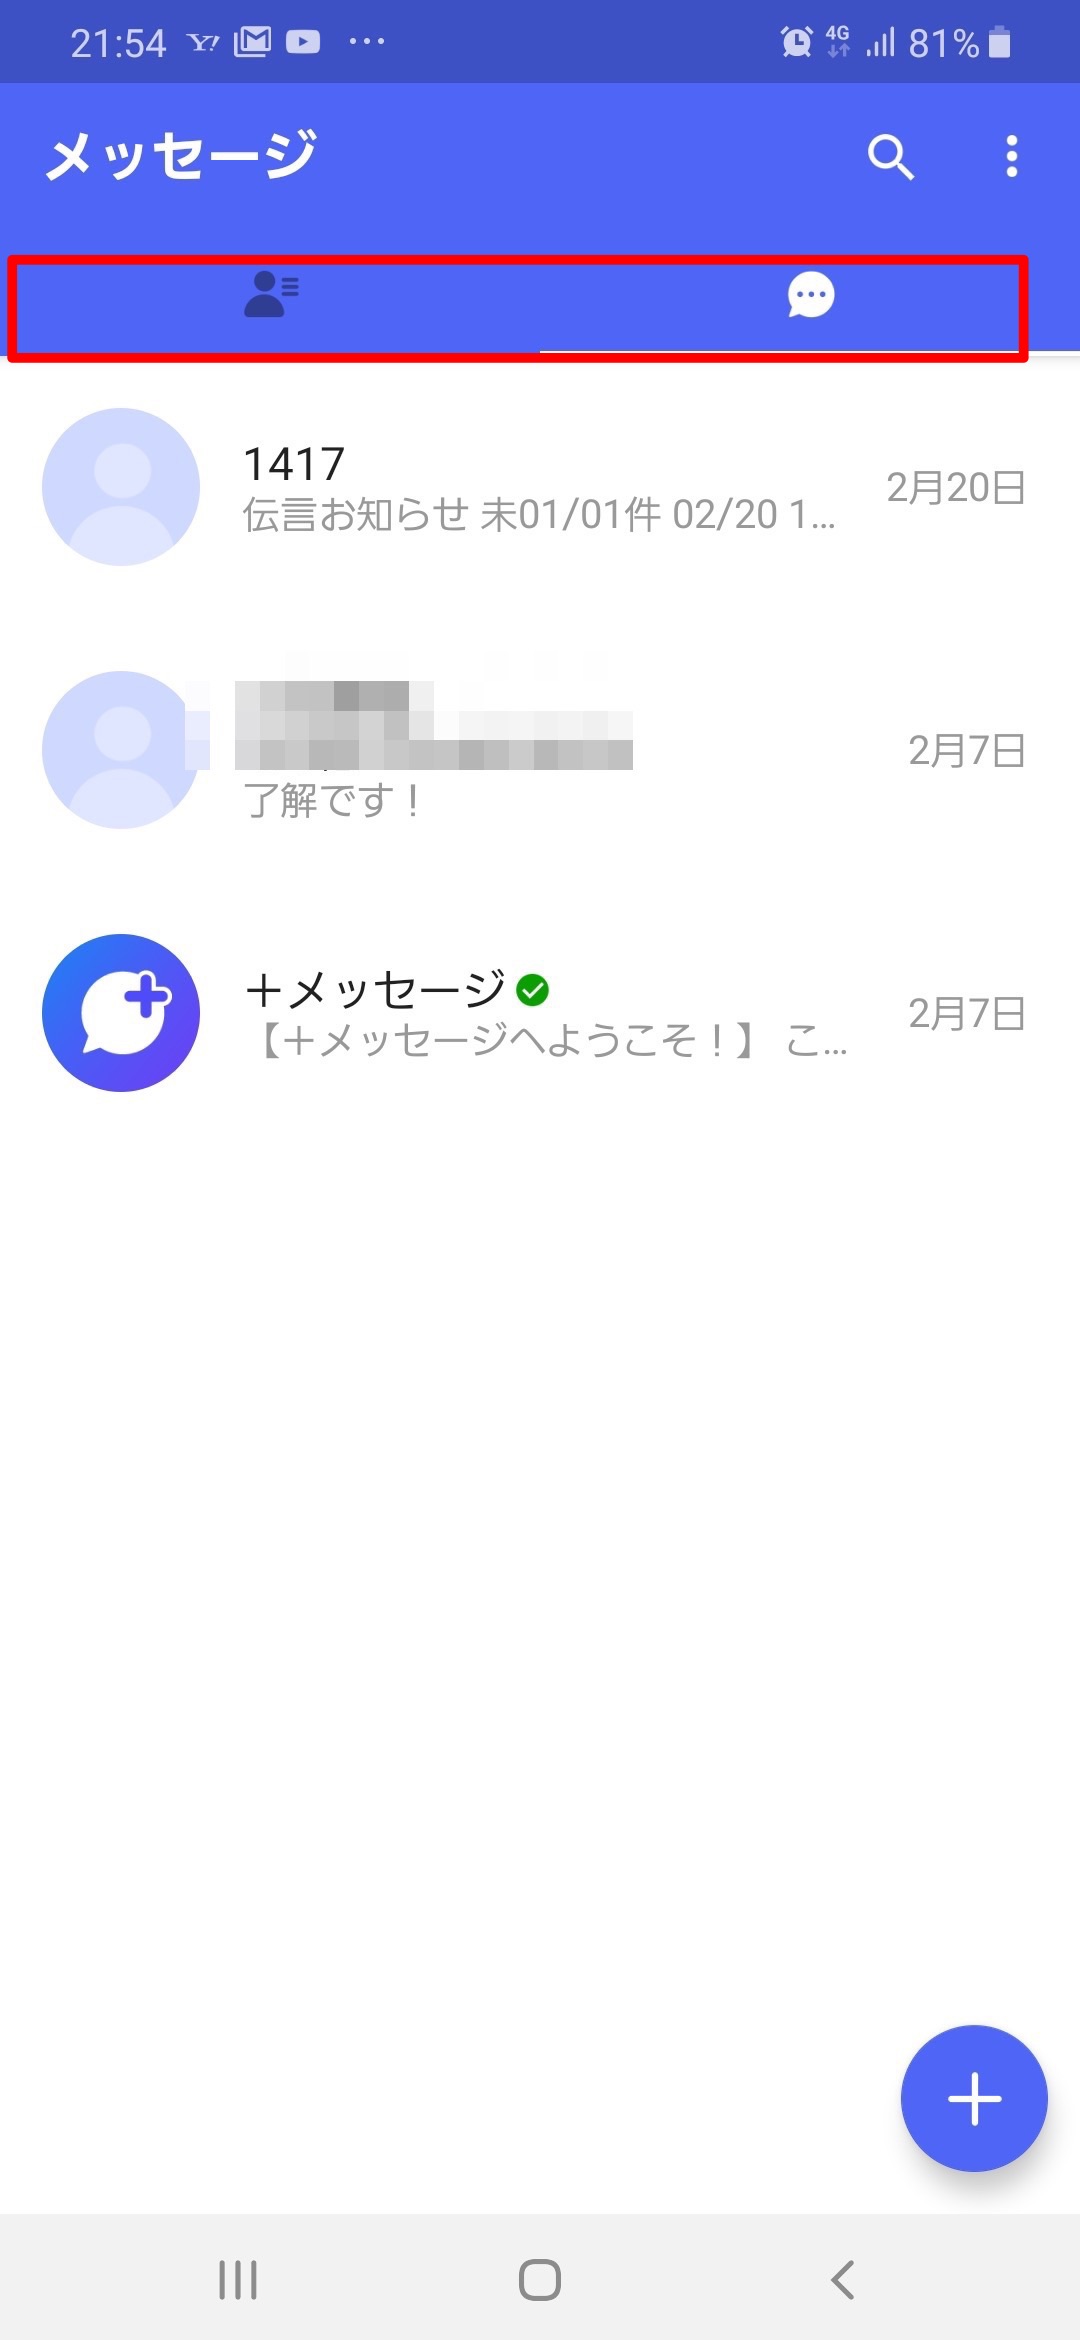 sms で 写真 を 送る に は